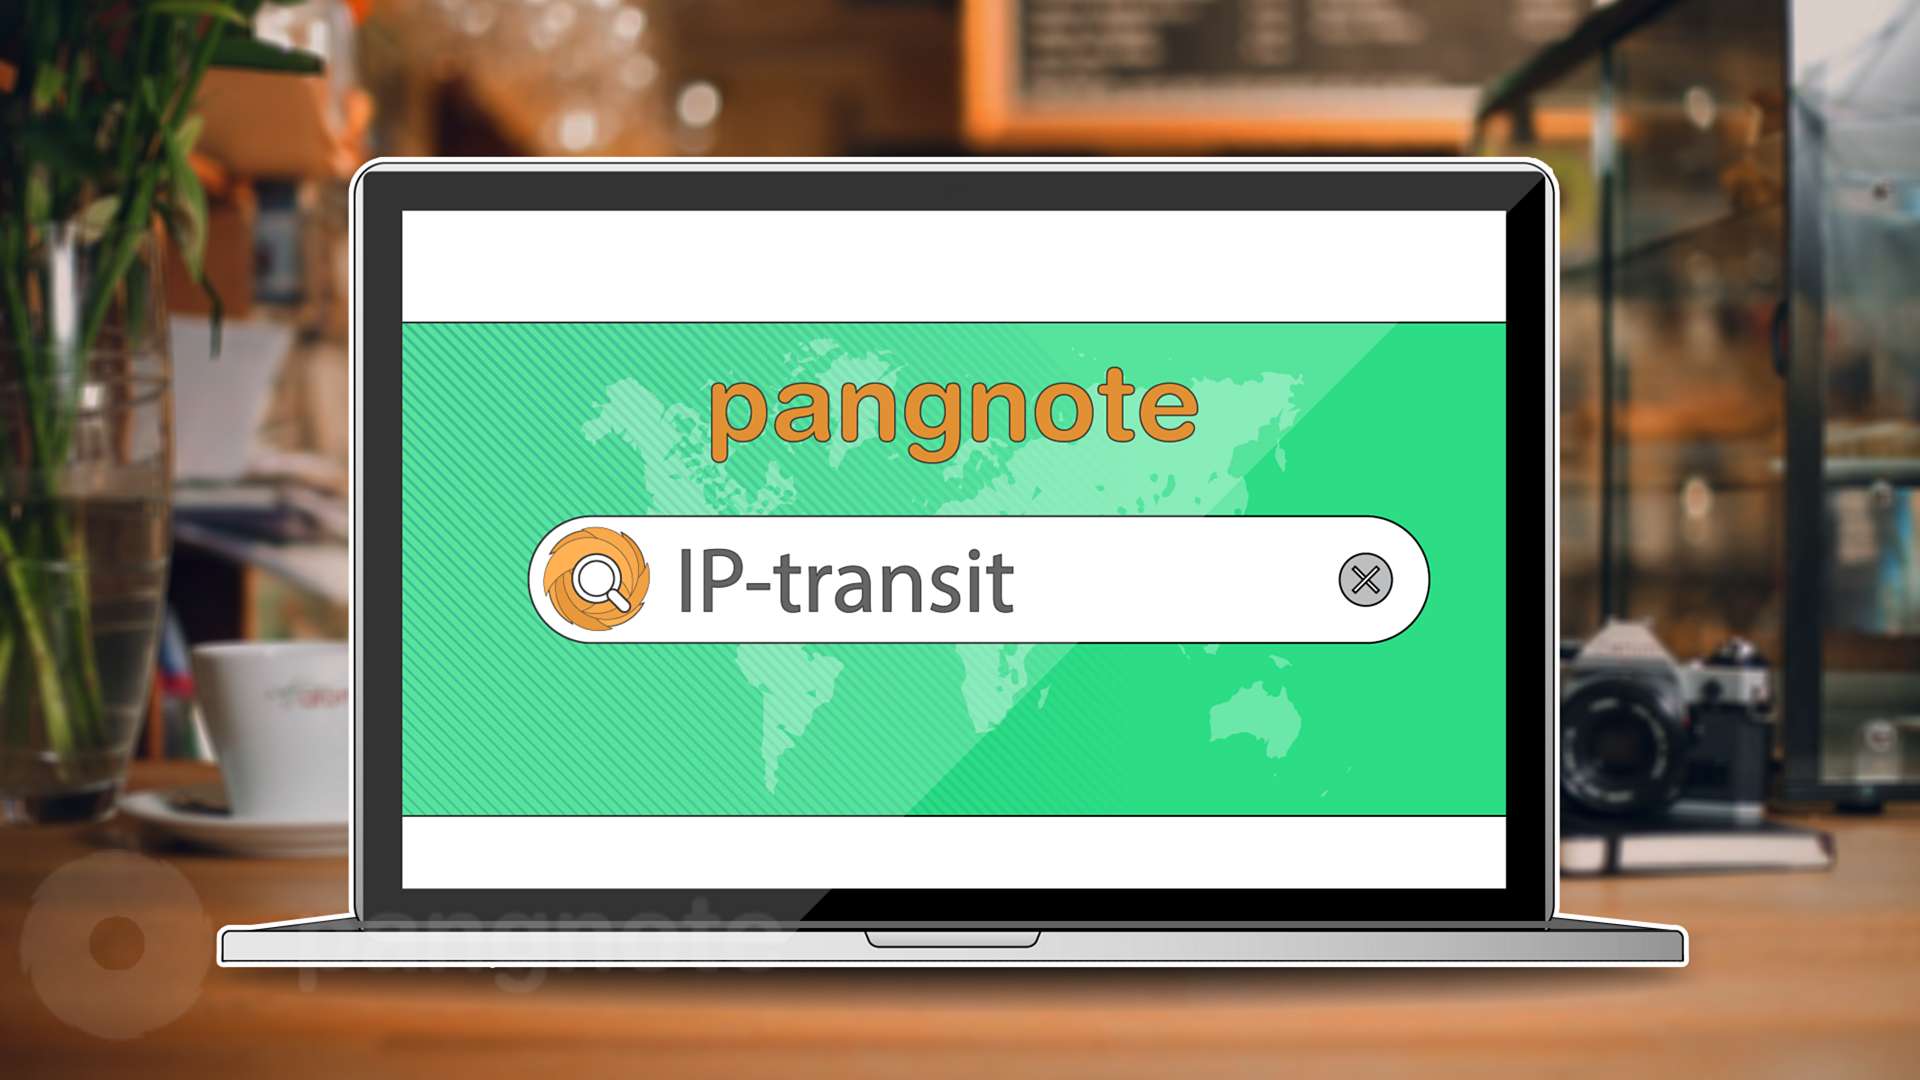 Search for IP transit and similar specific services using Pangnote